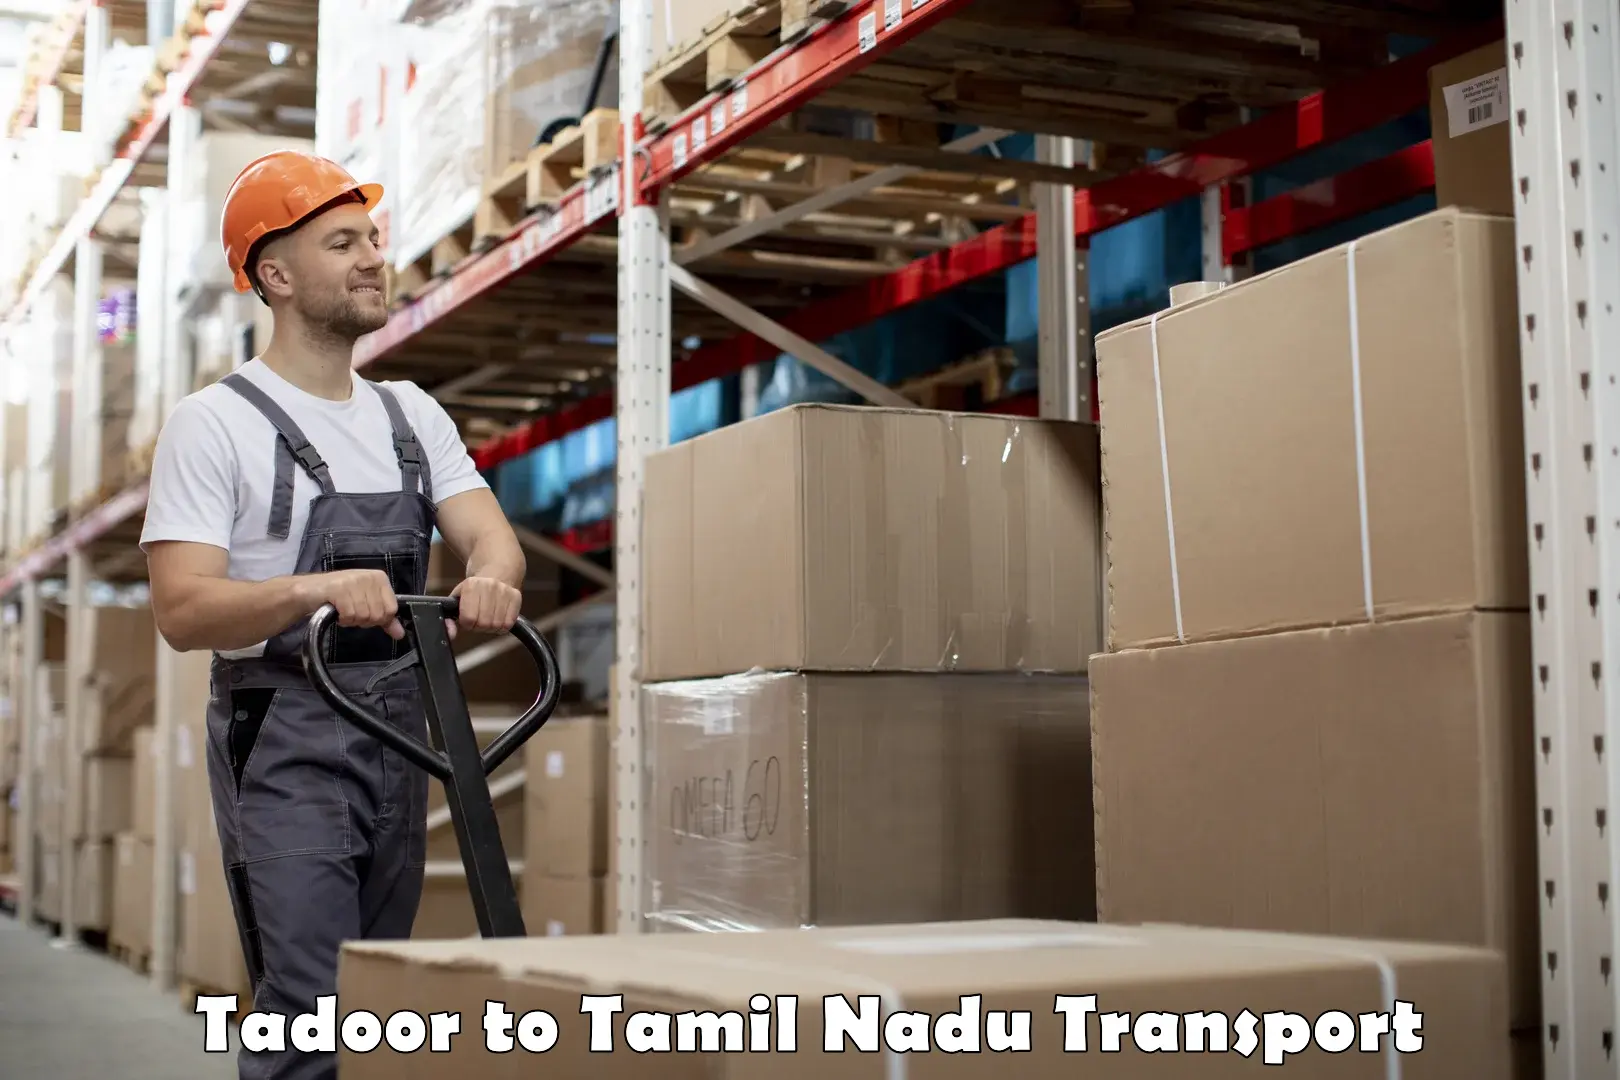 Domestic goods transportation services Tadoor to Shanmugha Arts Science Technology and Research Academy Thanjavur